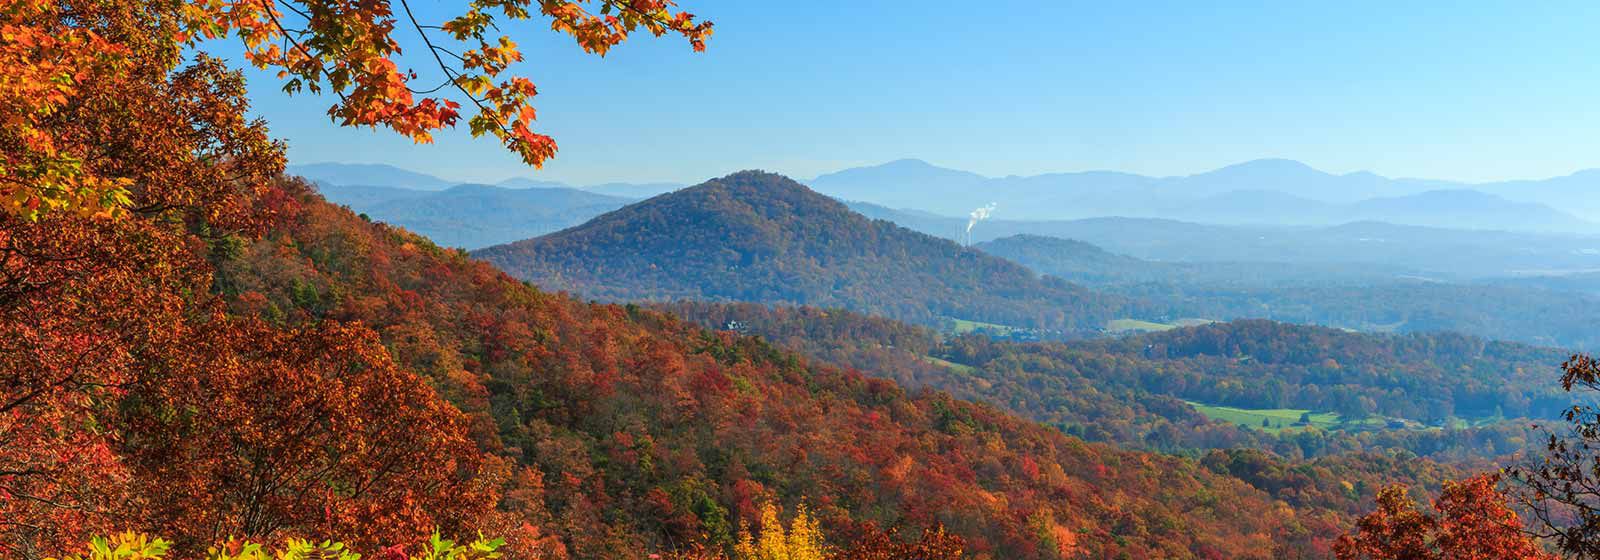 Mountain view in the fall